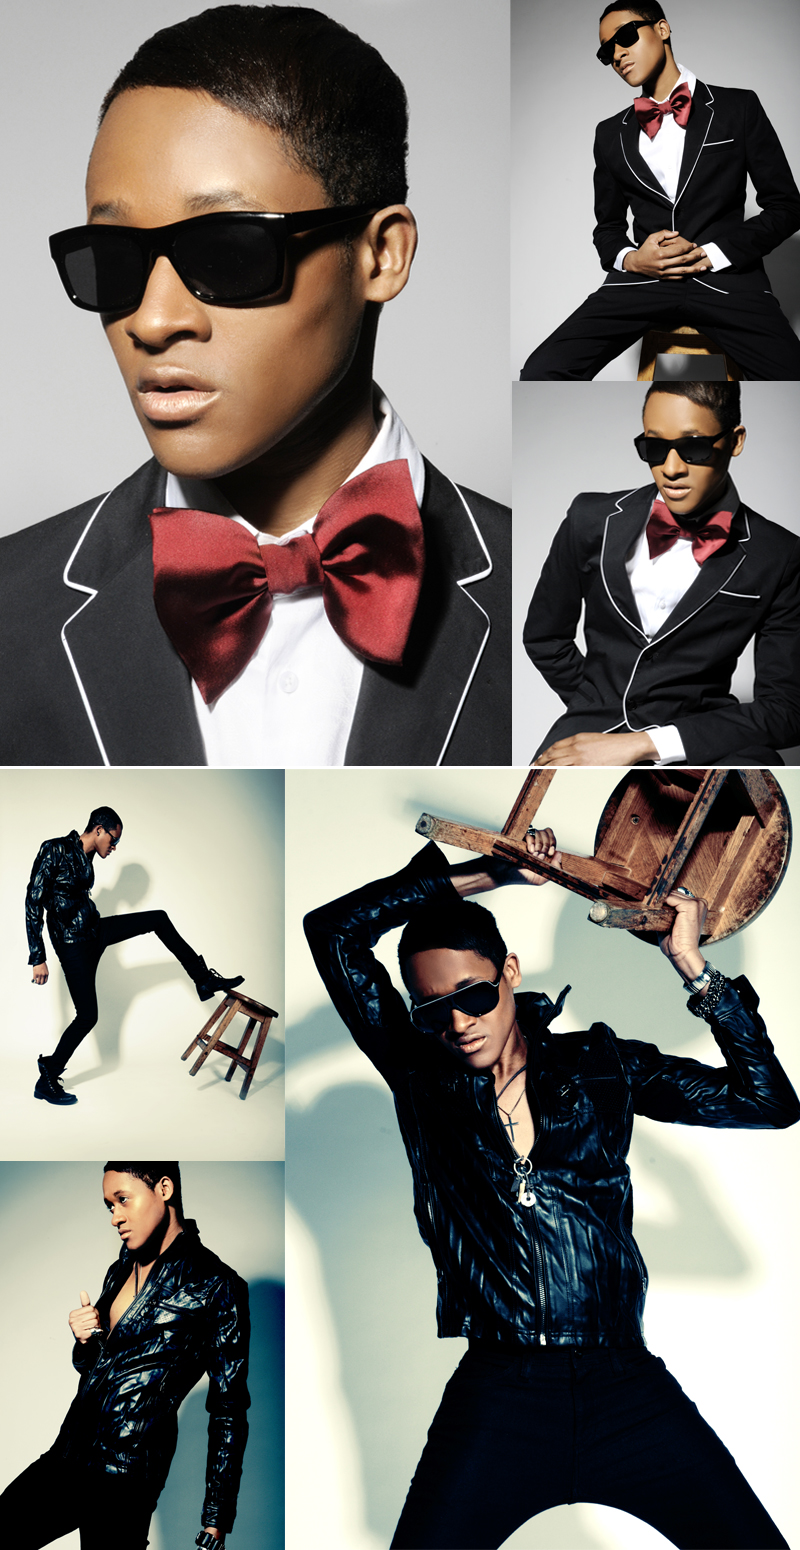 Male model photo shoot of Romone T by Ema Suvajac, hair styled by RachelleG, makeup by BeautyMarked